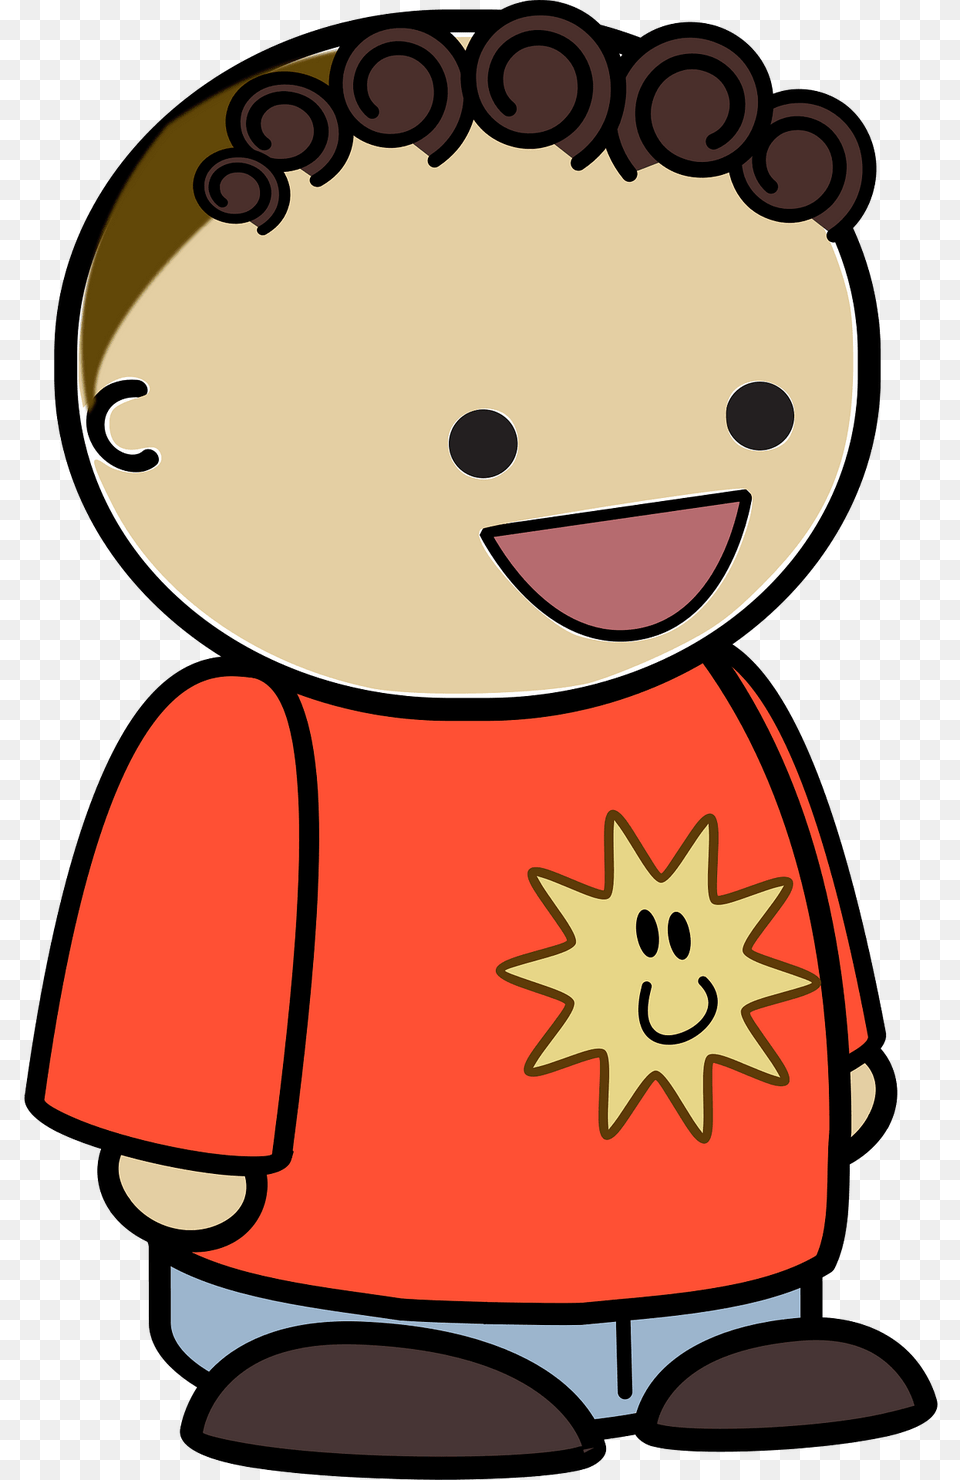 Brown Haired Boy In An Orange Shirt Laughing To The Side Clipart Free Png